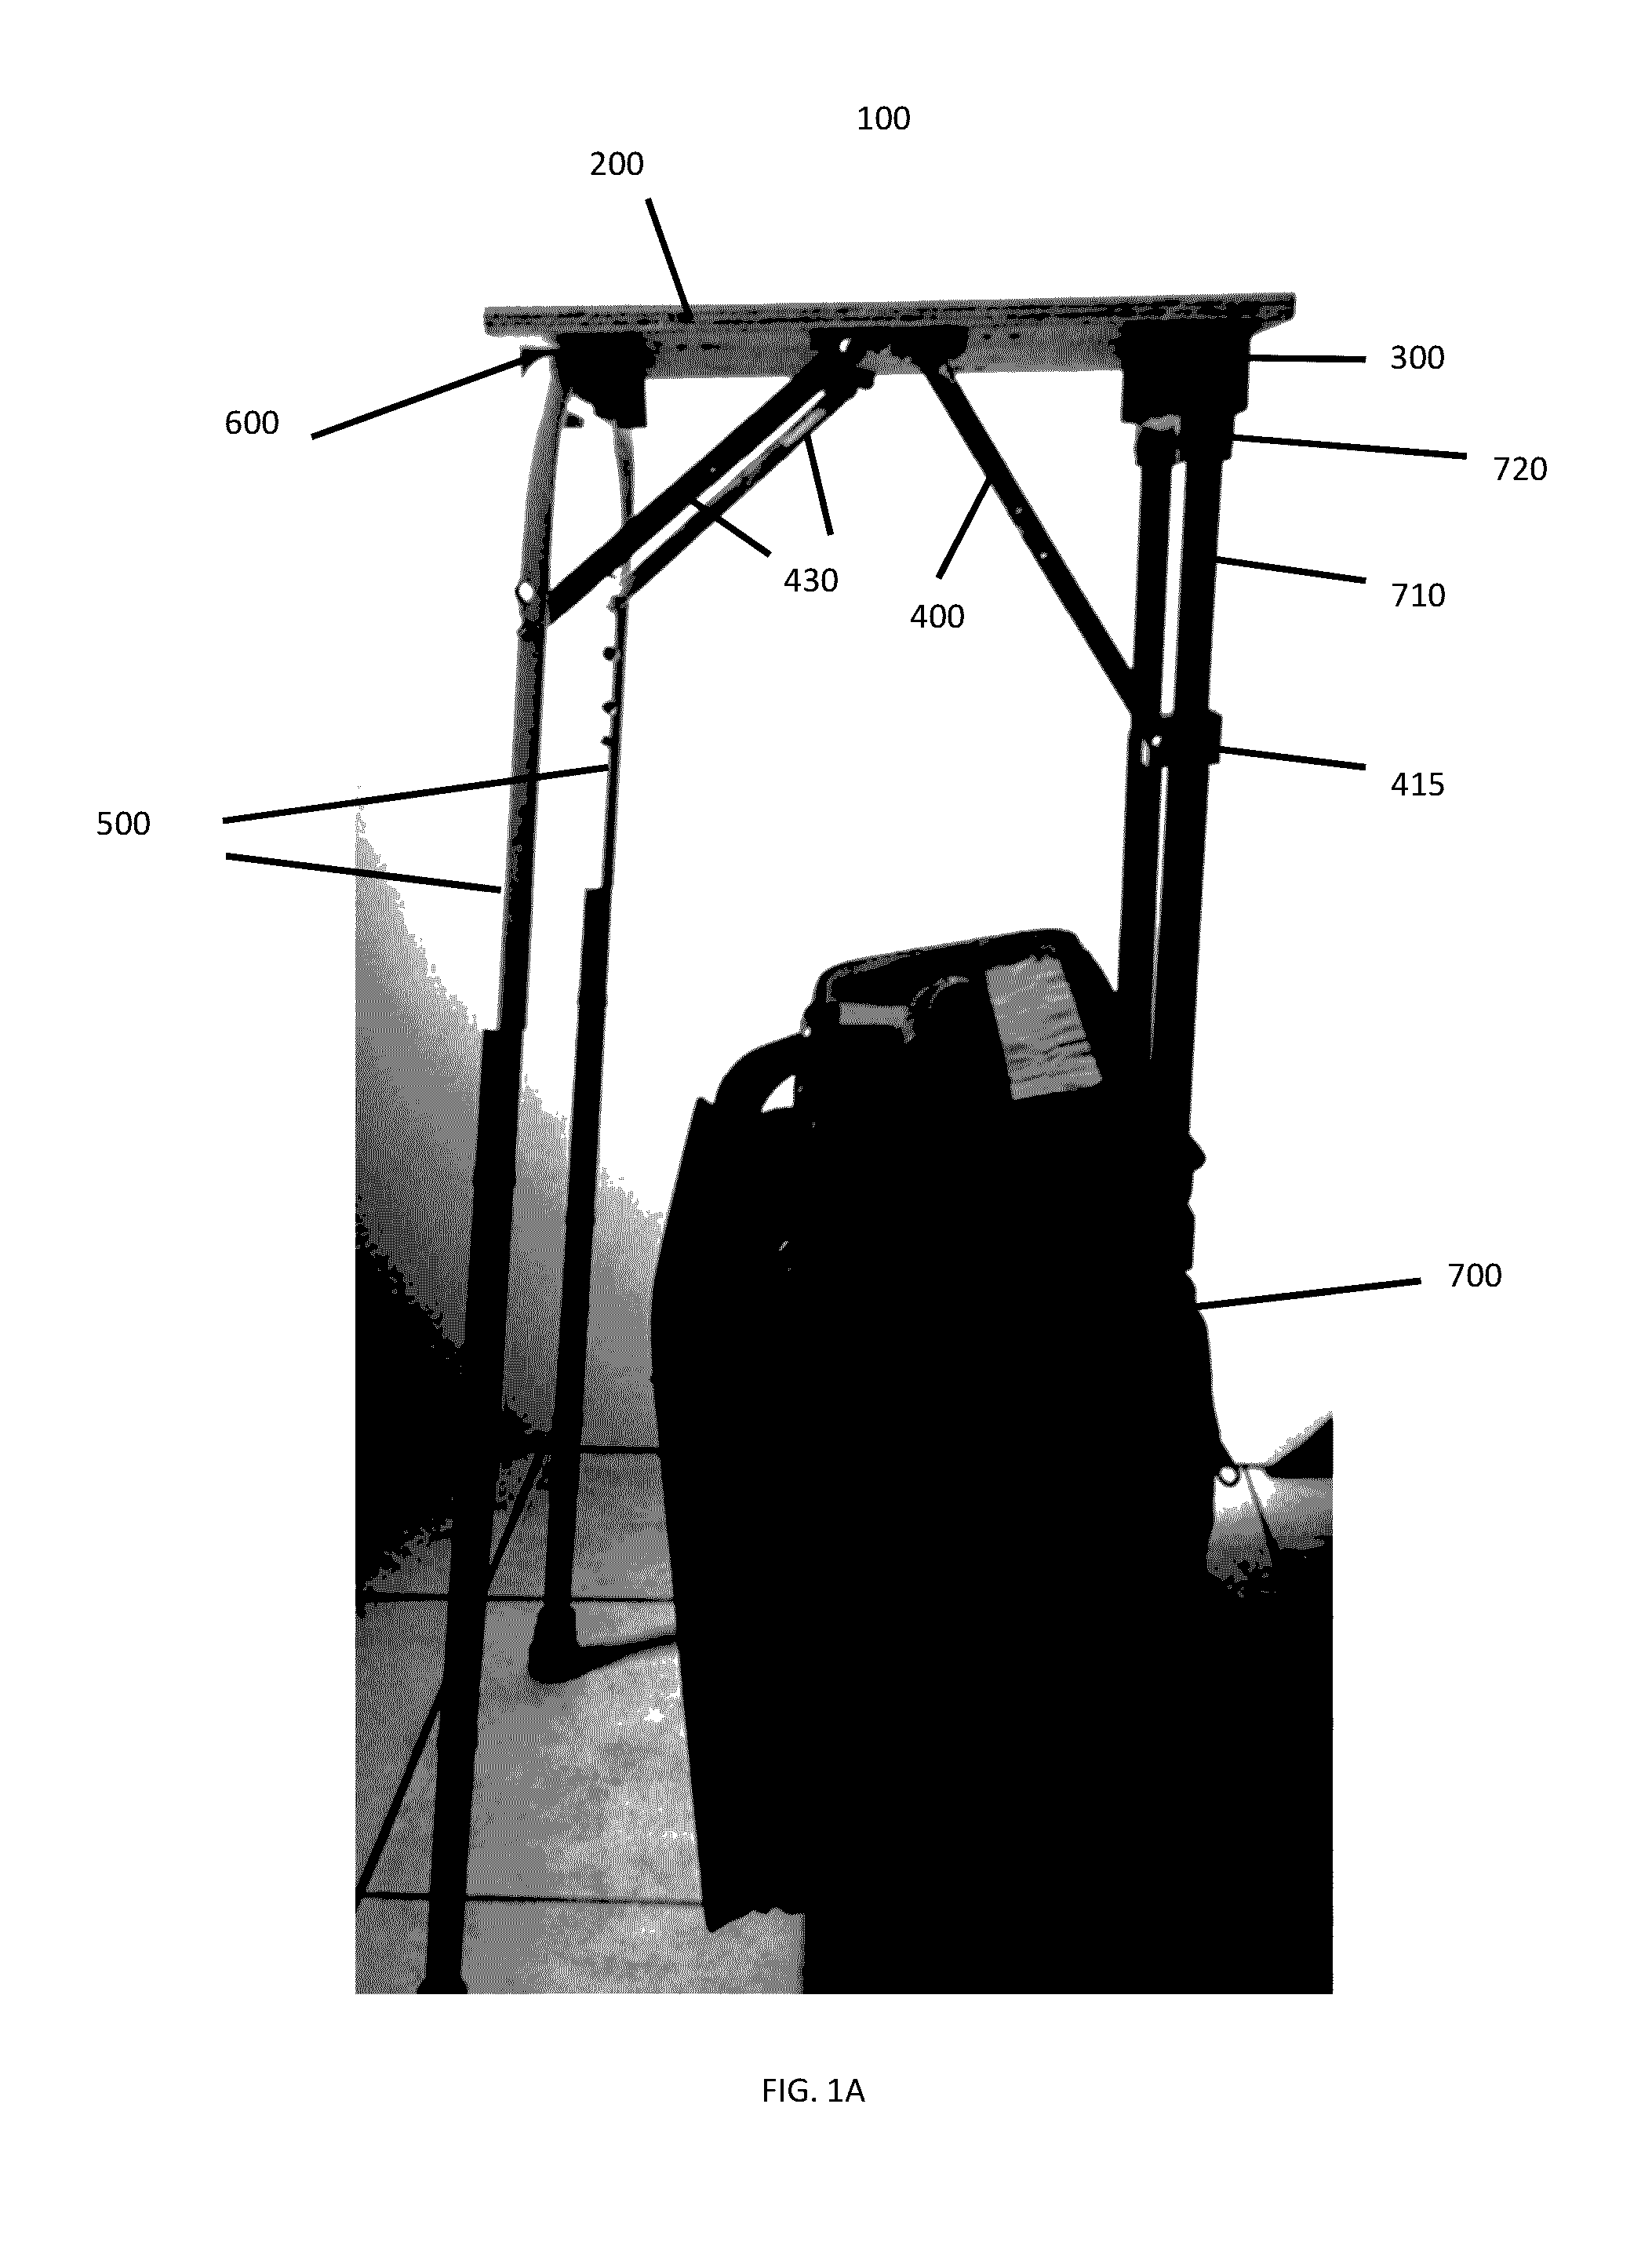 Height adjustable support tray apparatus